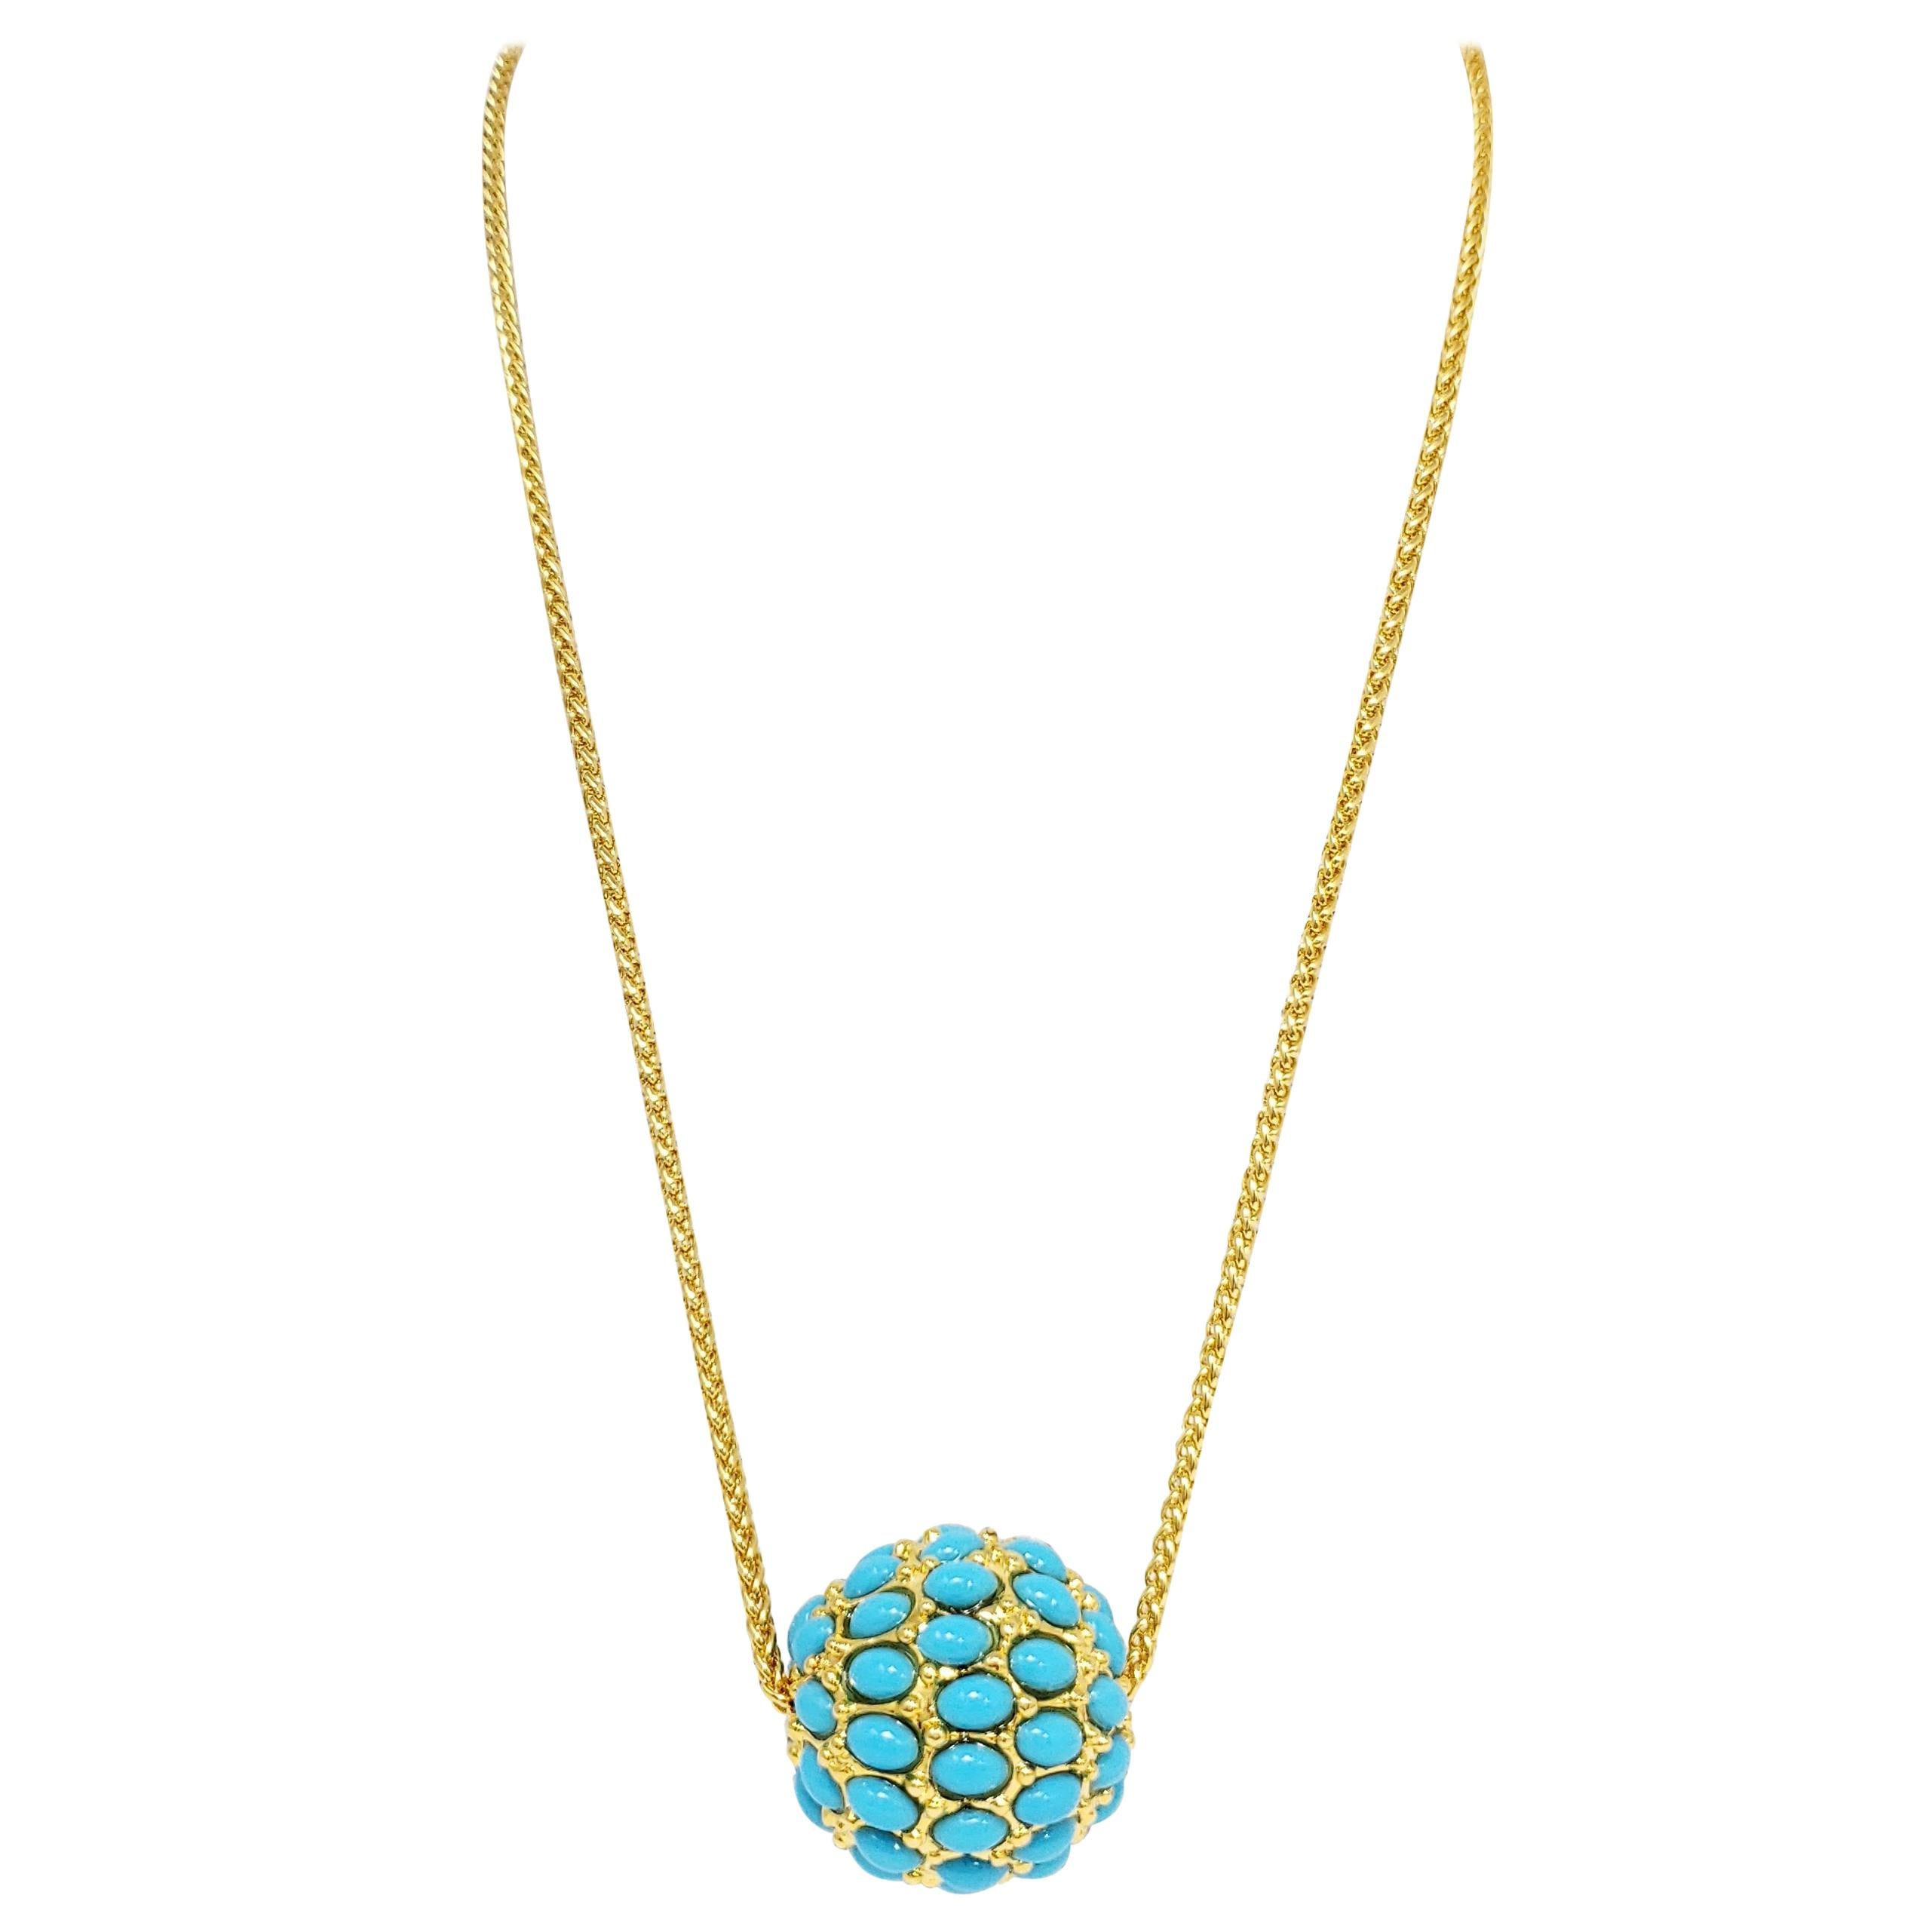 Kenneth Jay Lane Pave Turquoise Cabochon Ball Pendant Golden Chain Necklace